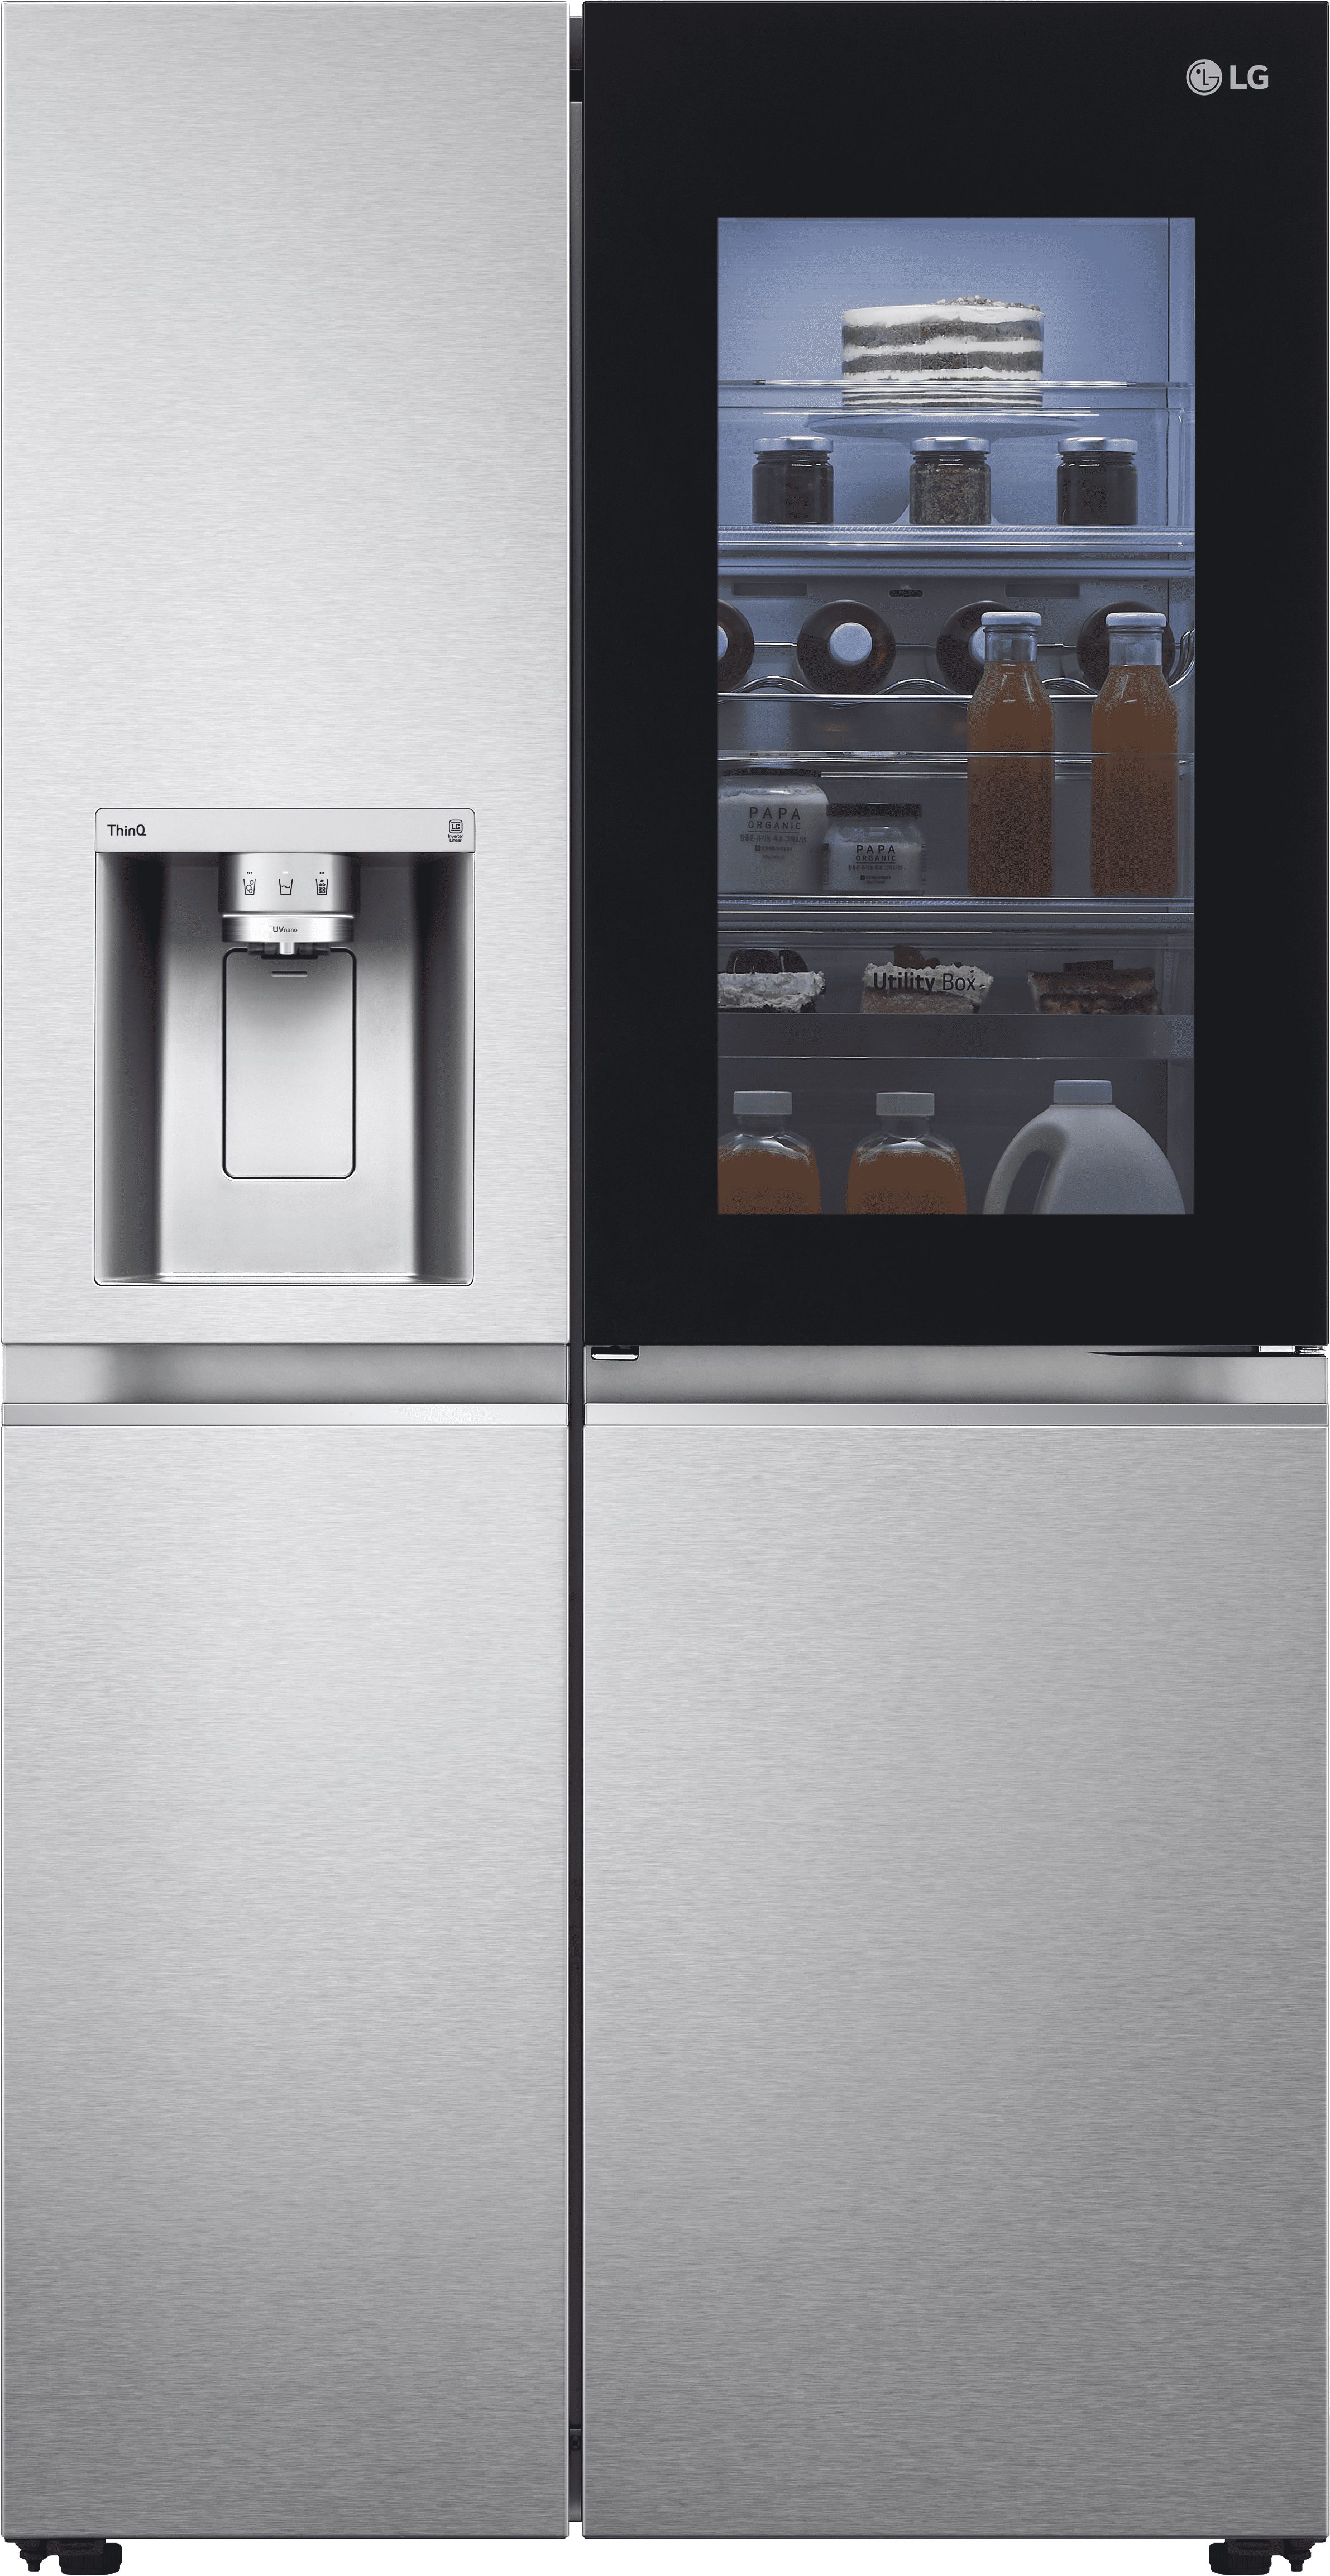 LG GSXV91BSAE Wifi Connected Non-Plumbed American Fridge Freezer with InstaView ThinQ, UVnano Tech, NatureFRESH, Stainless Steel